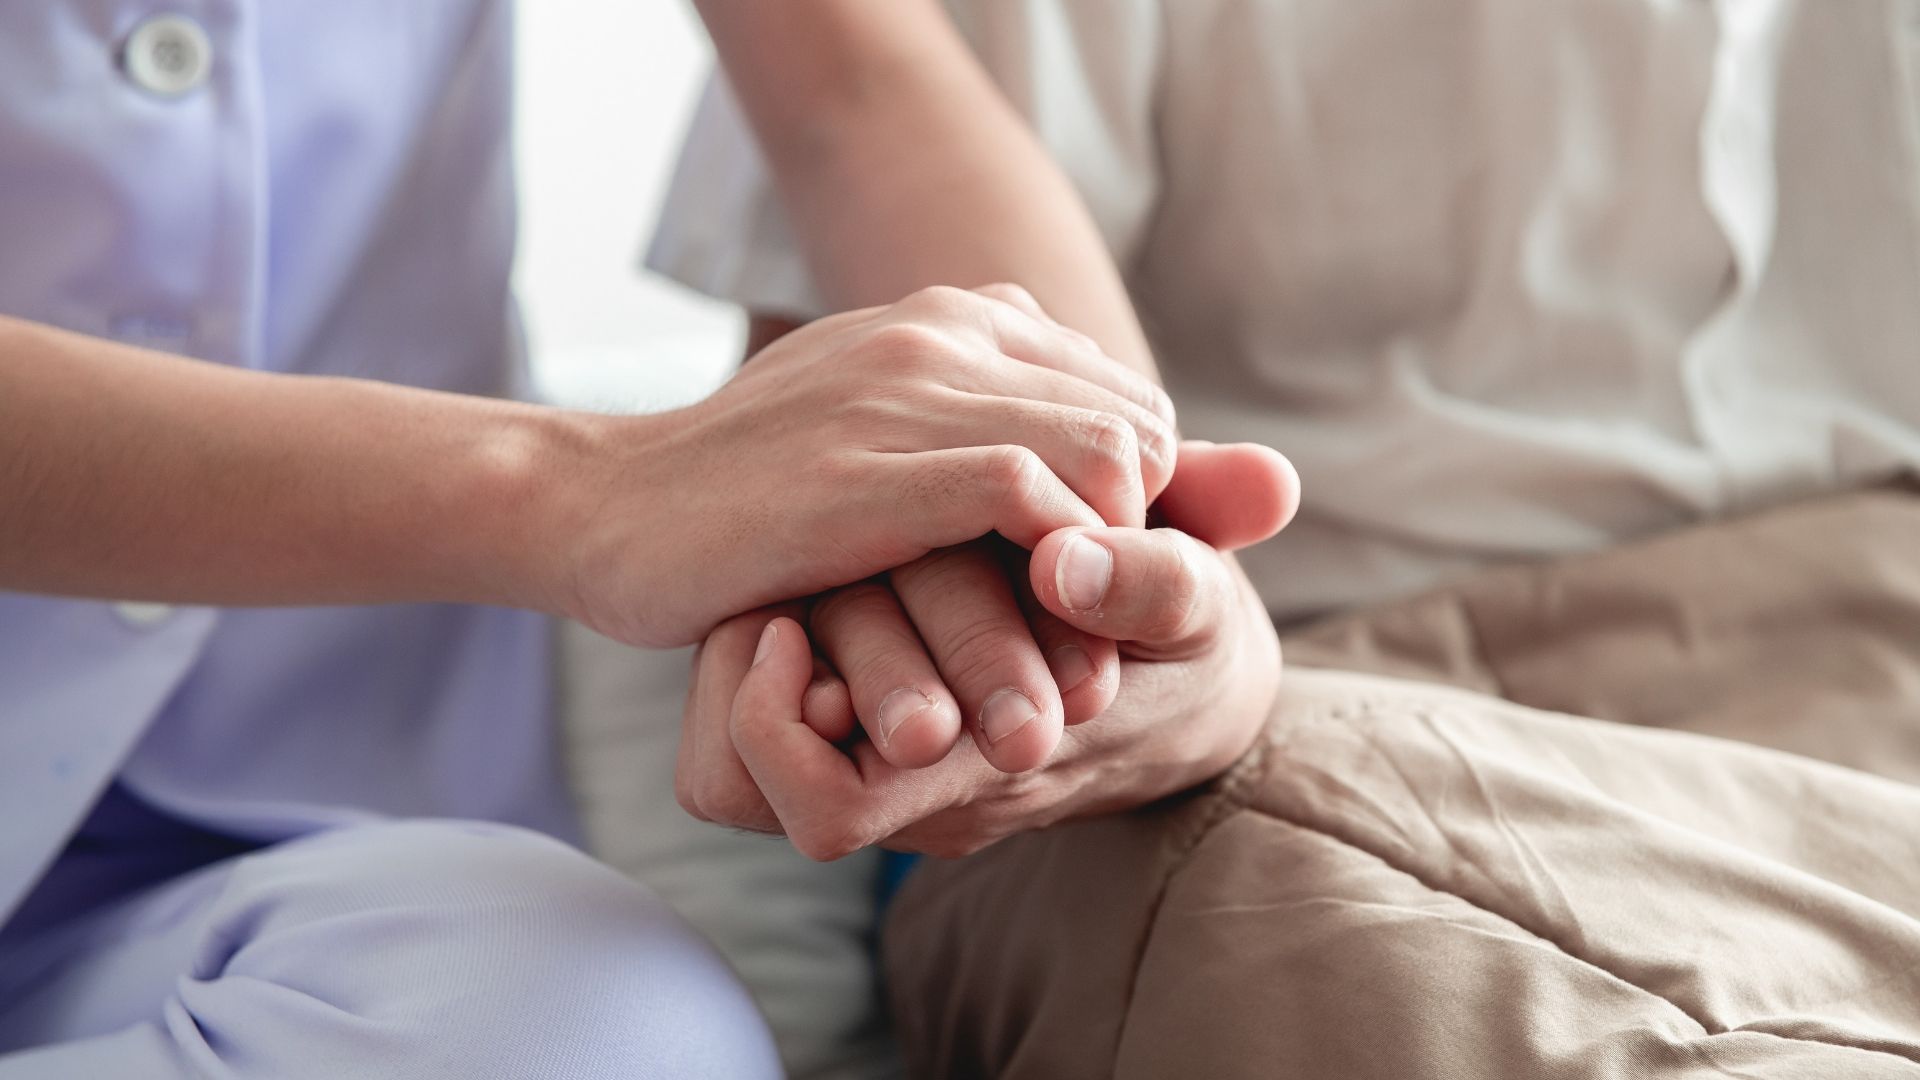 counselor and patient holding hands